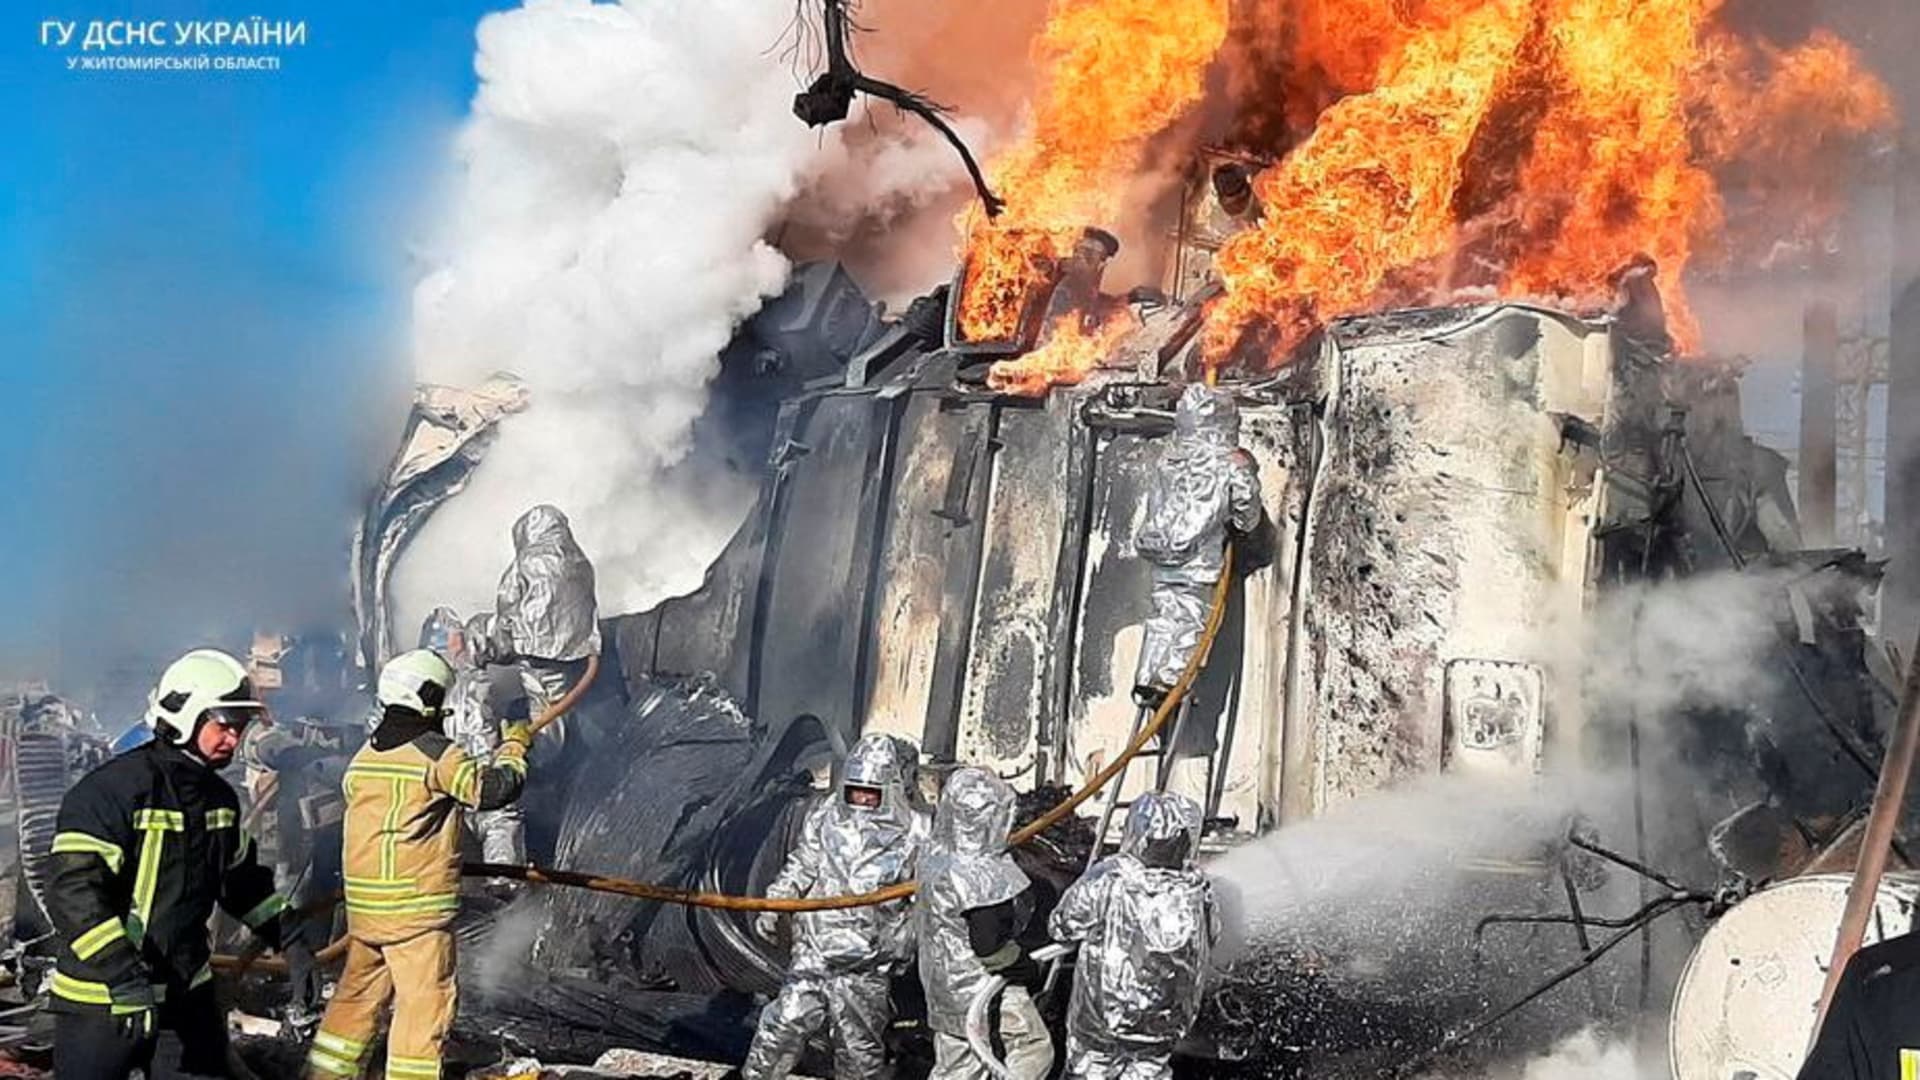 Firefighters work to put out a fire in an energy infrastructure facility, damaged by a Russian missile strike, as Russia's attack on Ukraine continues, in Zhytomyr, Ukraine, Oct. 18, 2022.